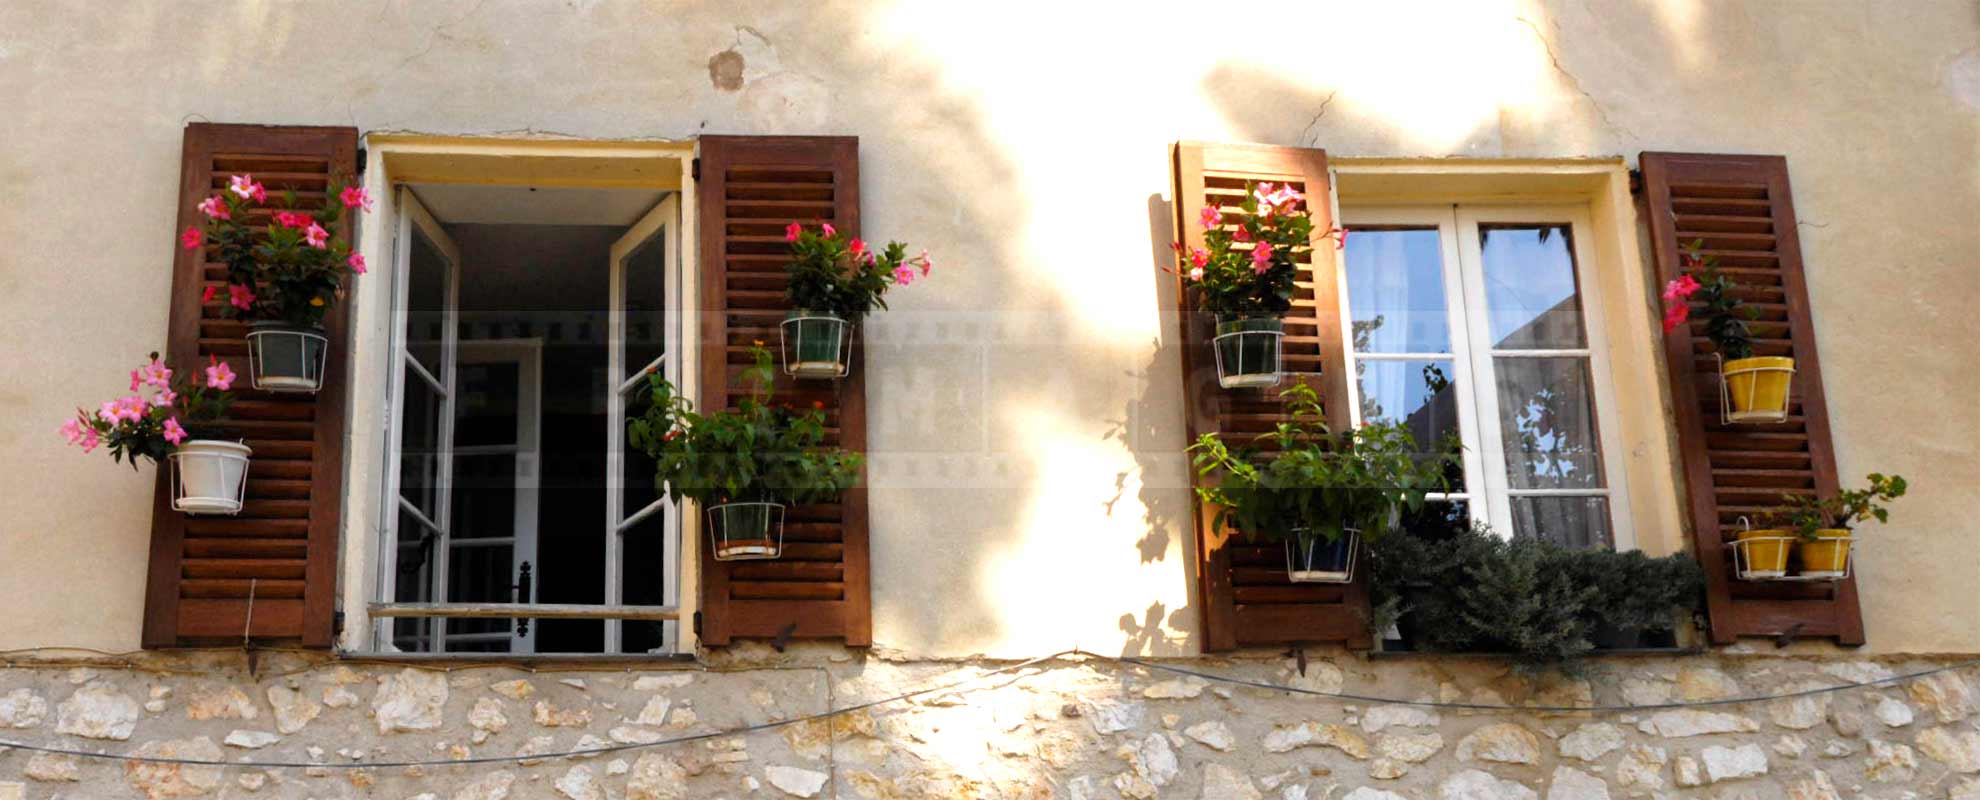 flowers and window shutters in small French town